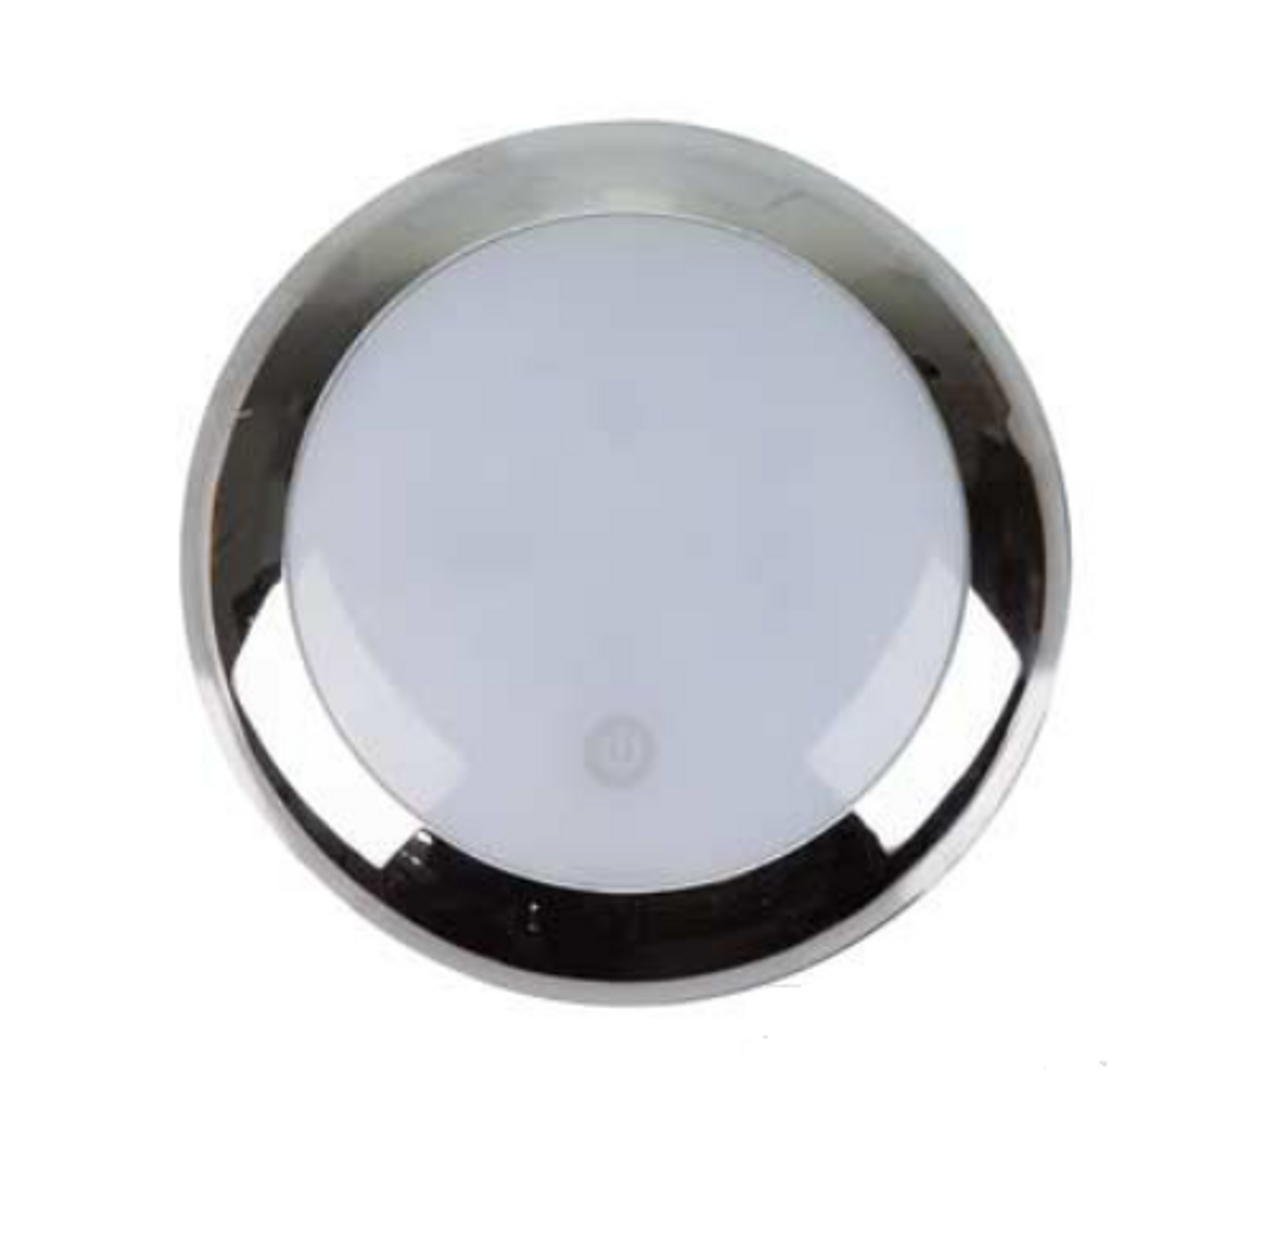 IL140SC - Round Interior LED Chrome Bezel Light. 12v 4.5W. Touch Sensor. Surface Mount. Low Current Draw.  RV. Ultimate LED. 